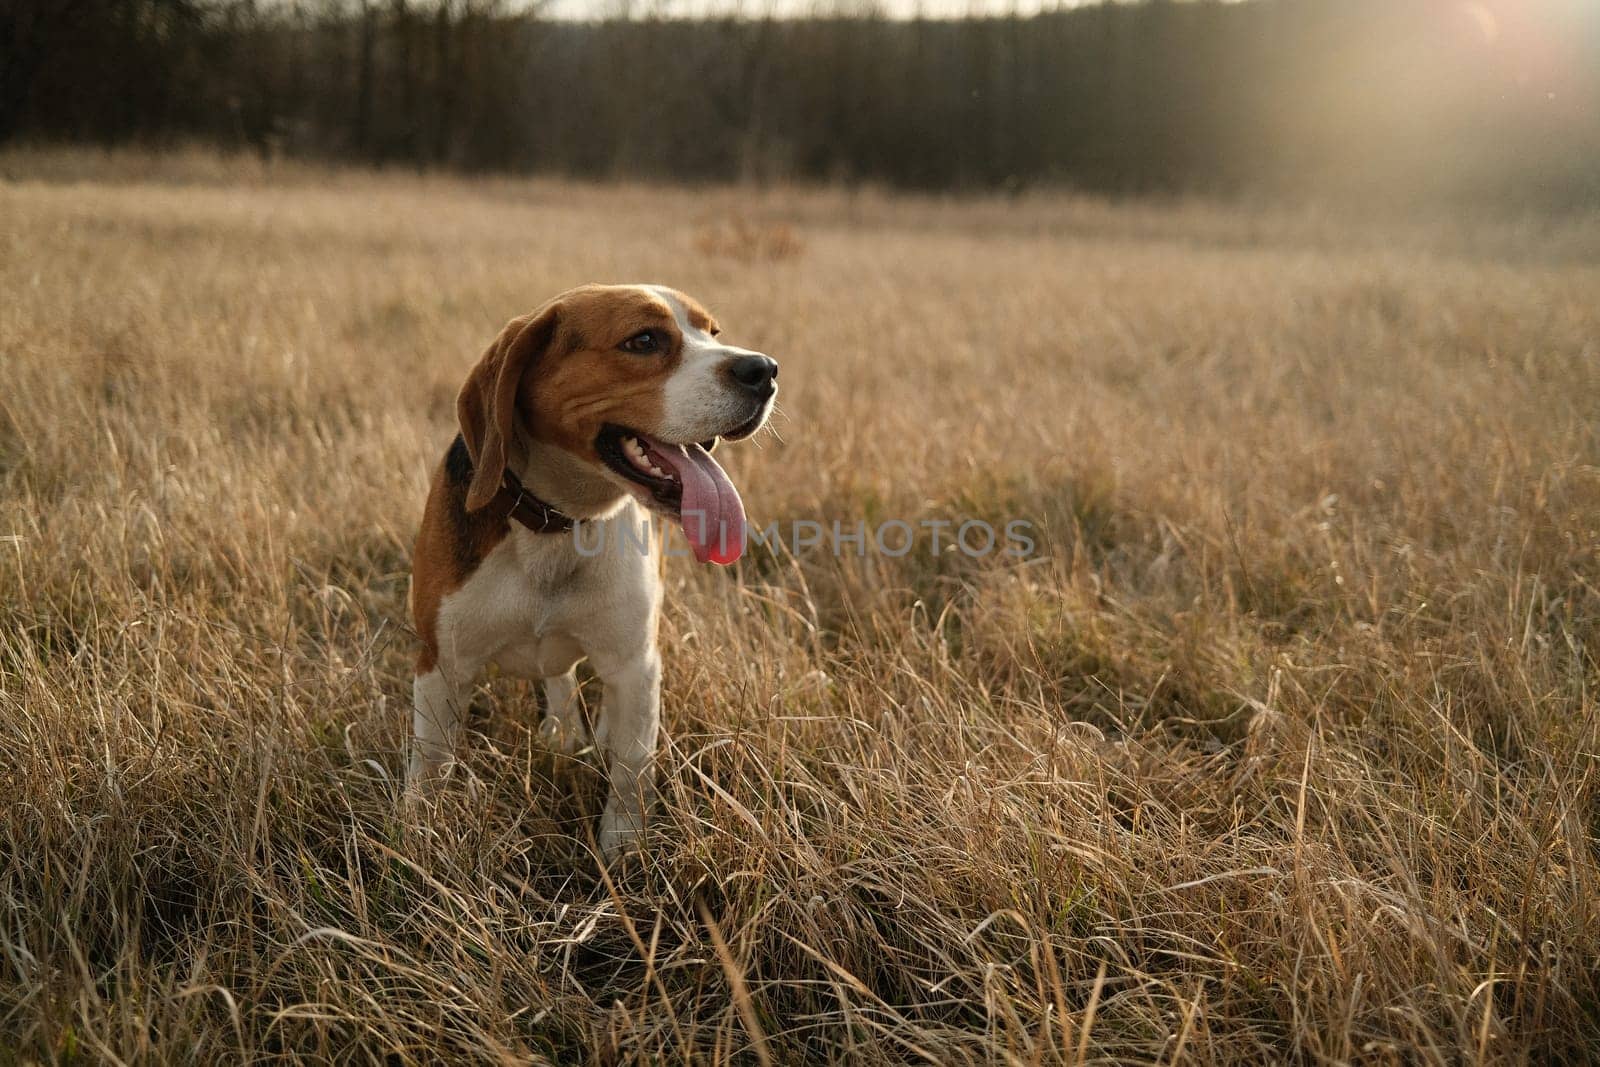 Lovely beagle puppy in yellow grass outdoor,golden hour.Cute dog on walk, nature background outside city. Adorable young doggy. High quality photo